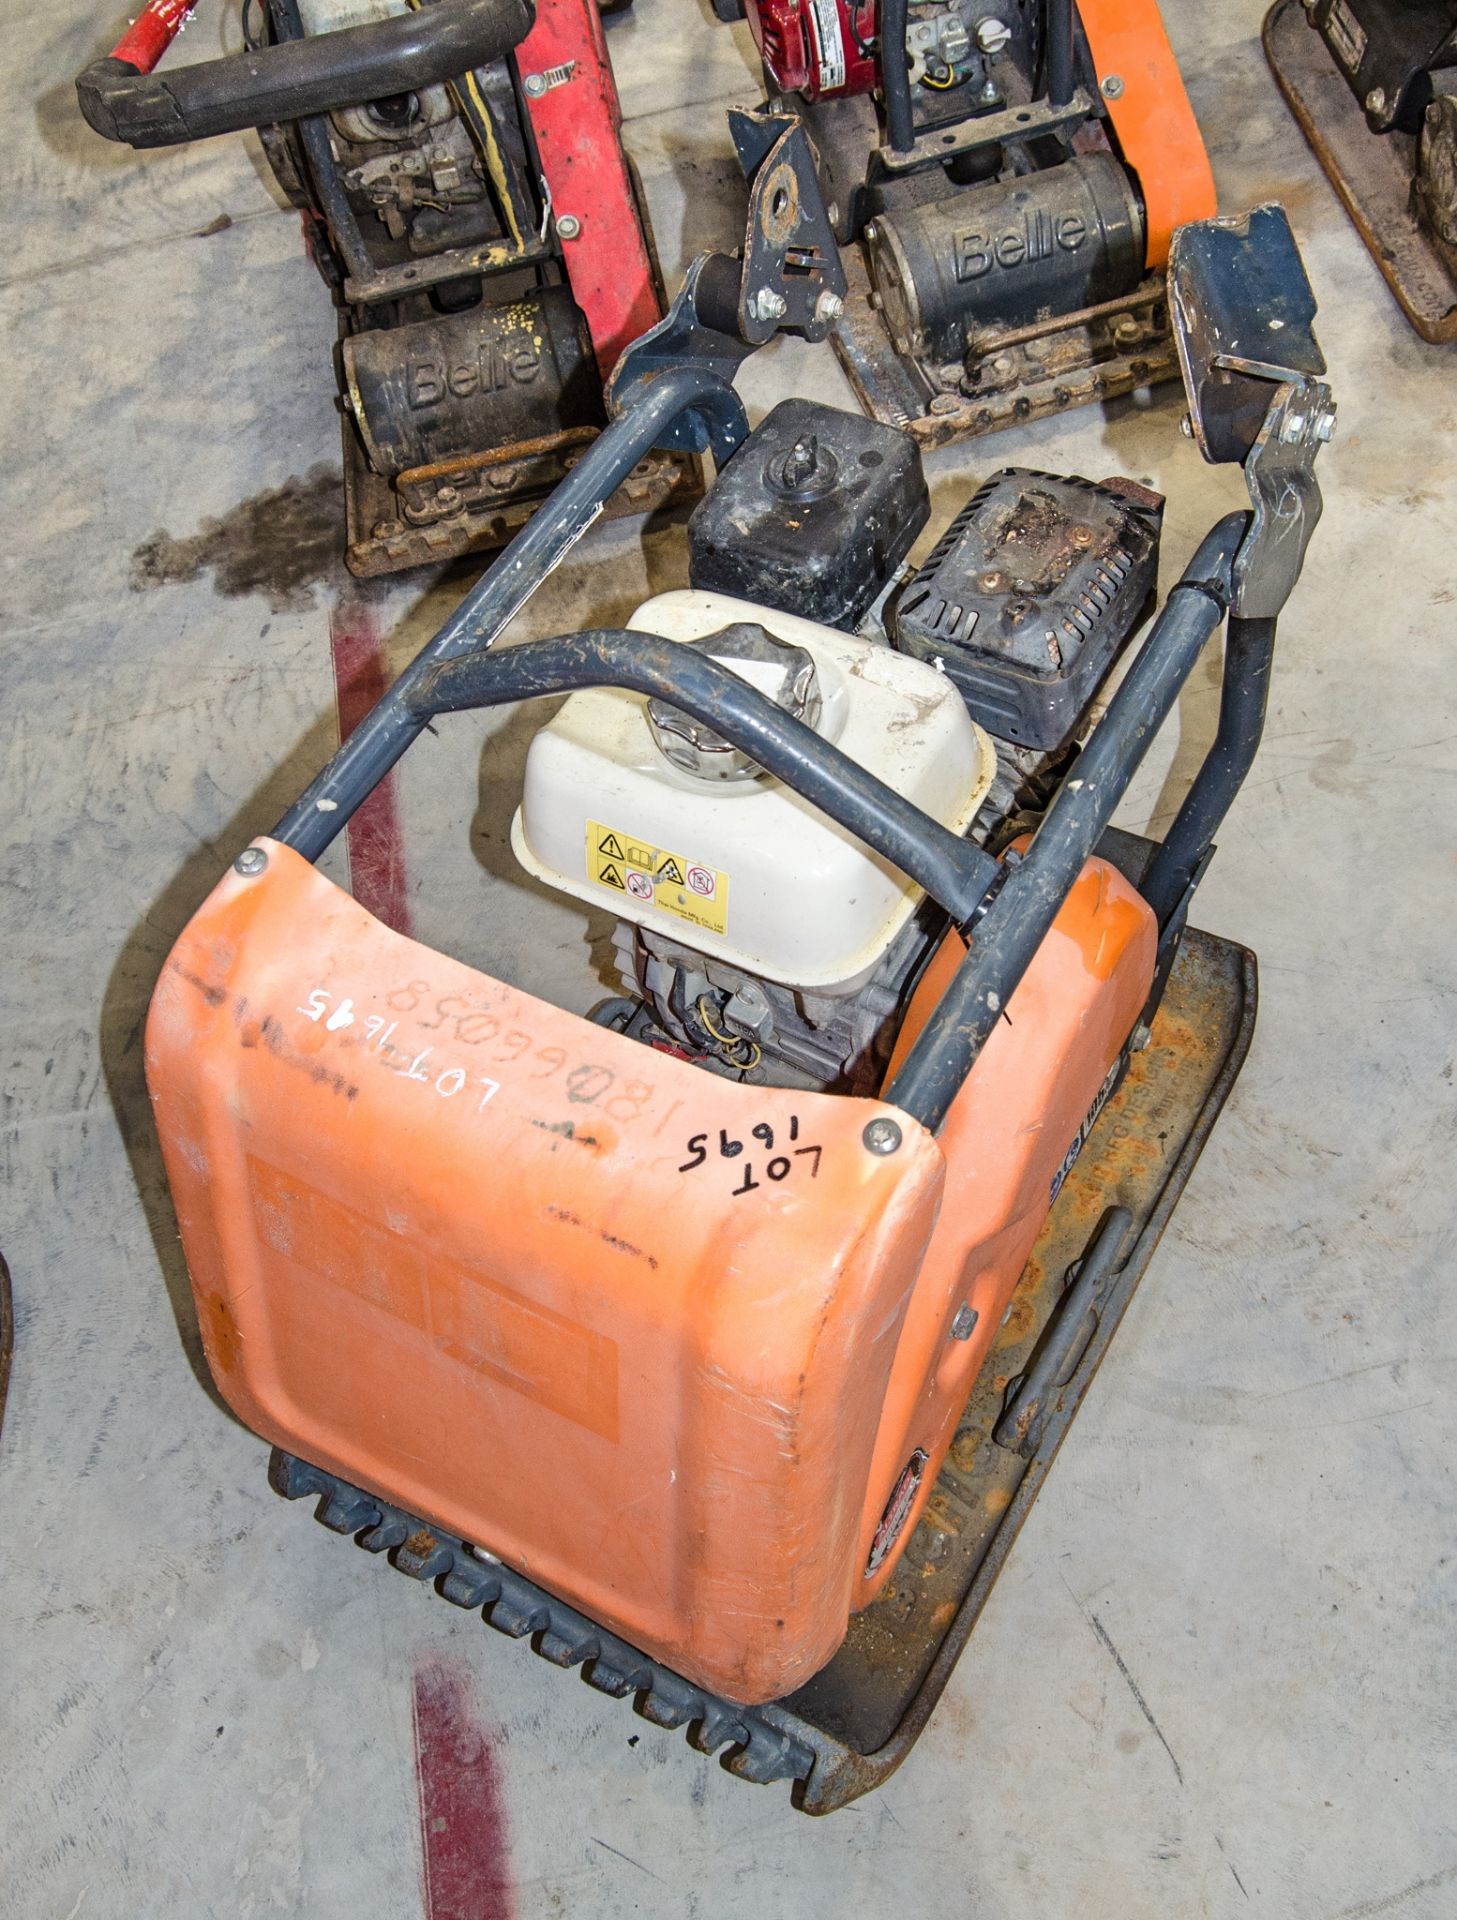 Altrad Belle FC4000E petrol driven compactor plate ** Pull cord assembly missing and handle